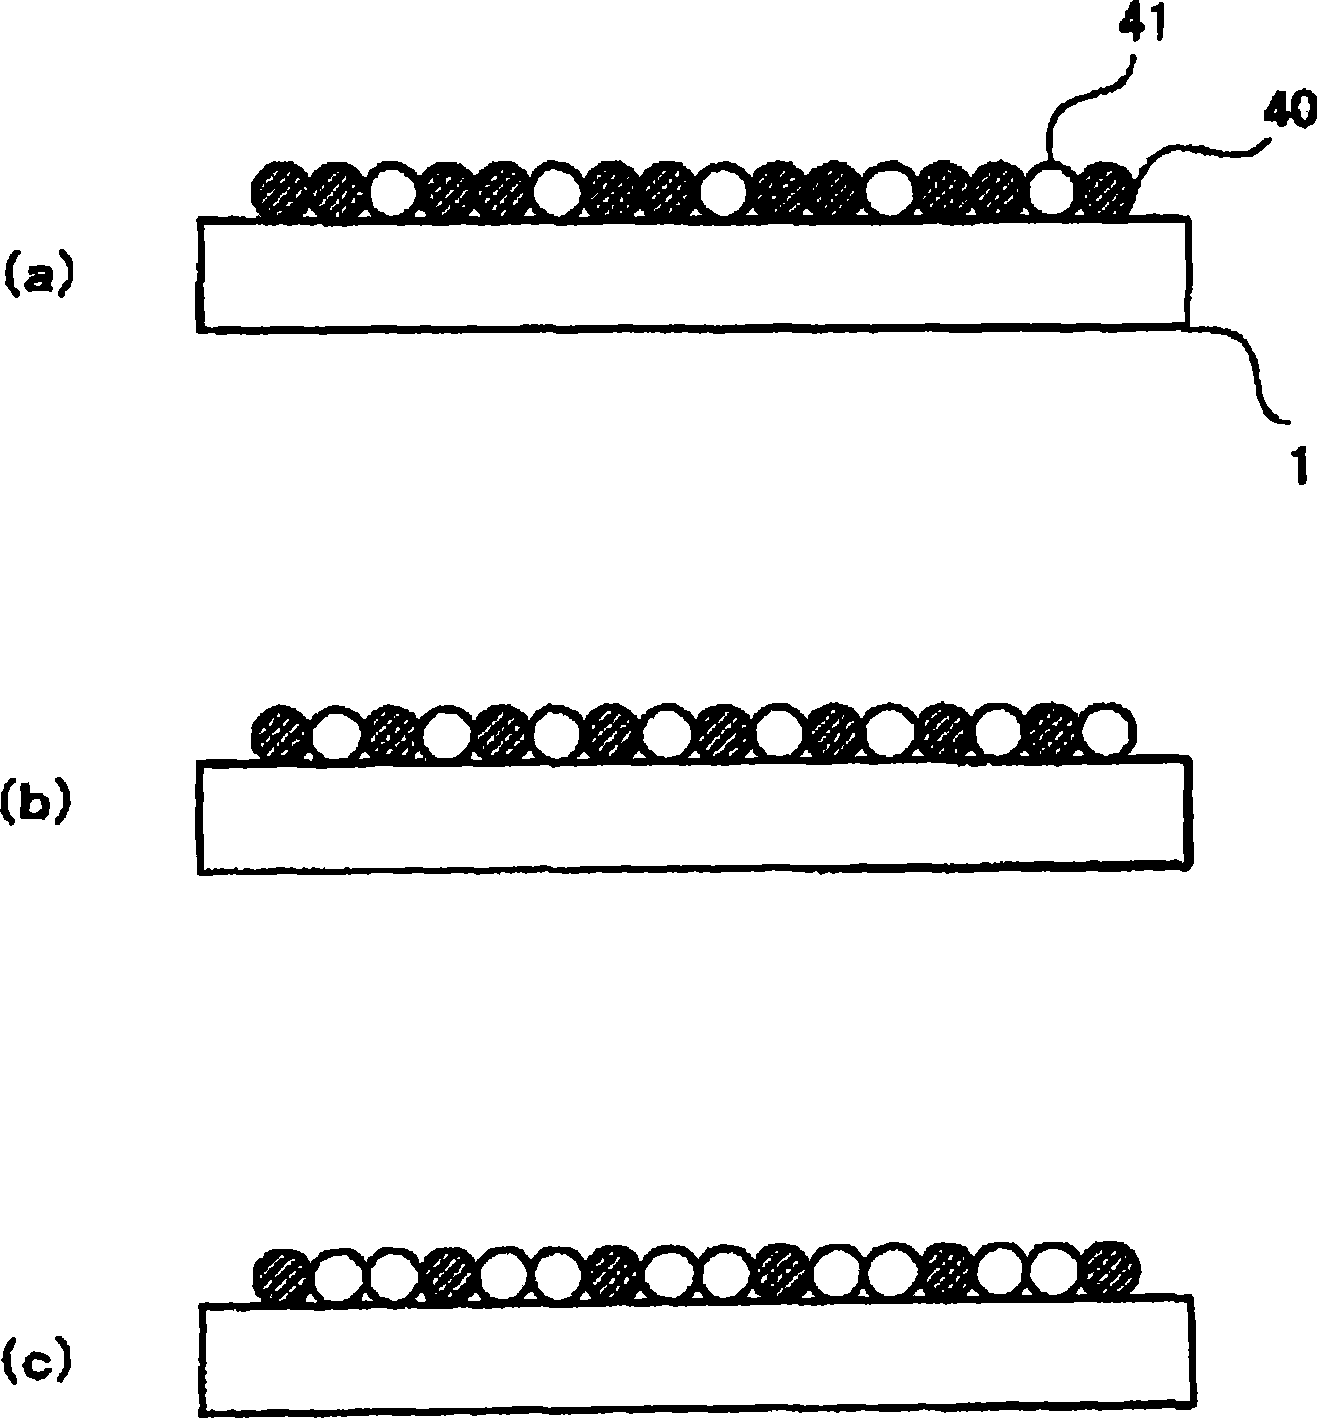 Process for production of carbon nanotube aggregates, carbon nanotube aggregates, catalyst particle dispersion membrane, electron emitters, and field emission displays